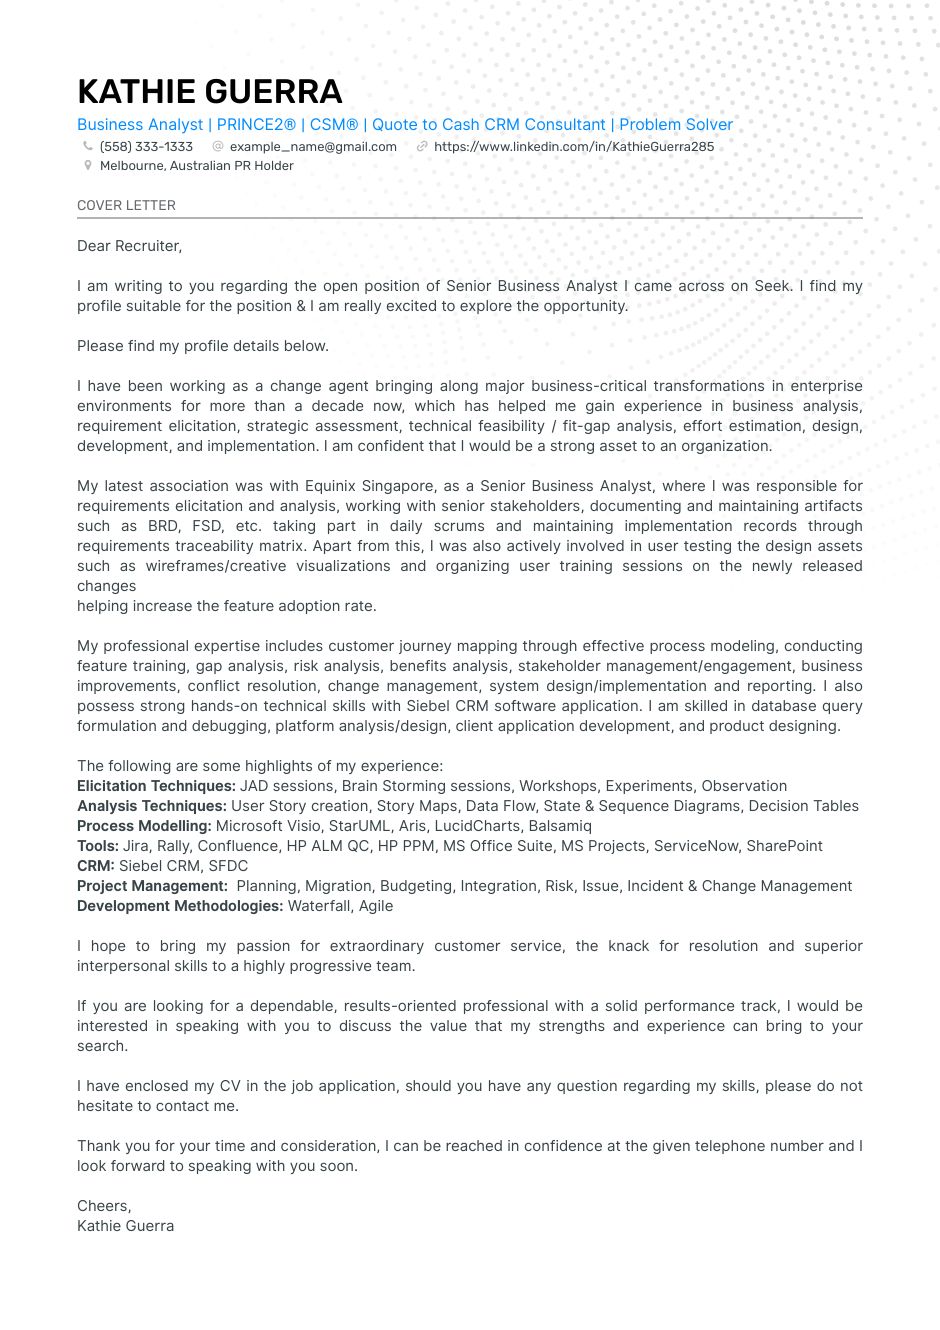 business-analyst-coverletter.png